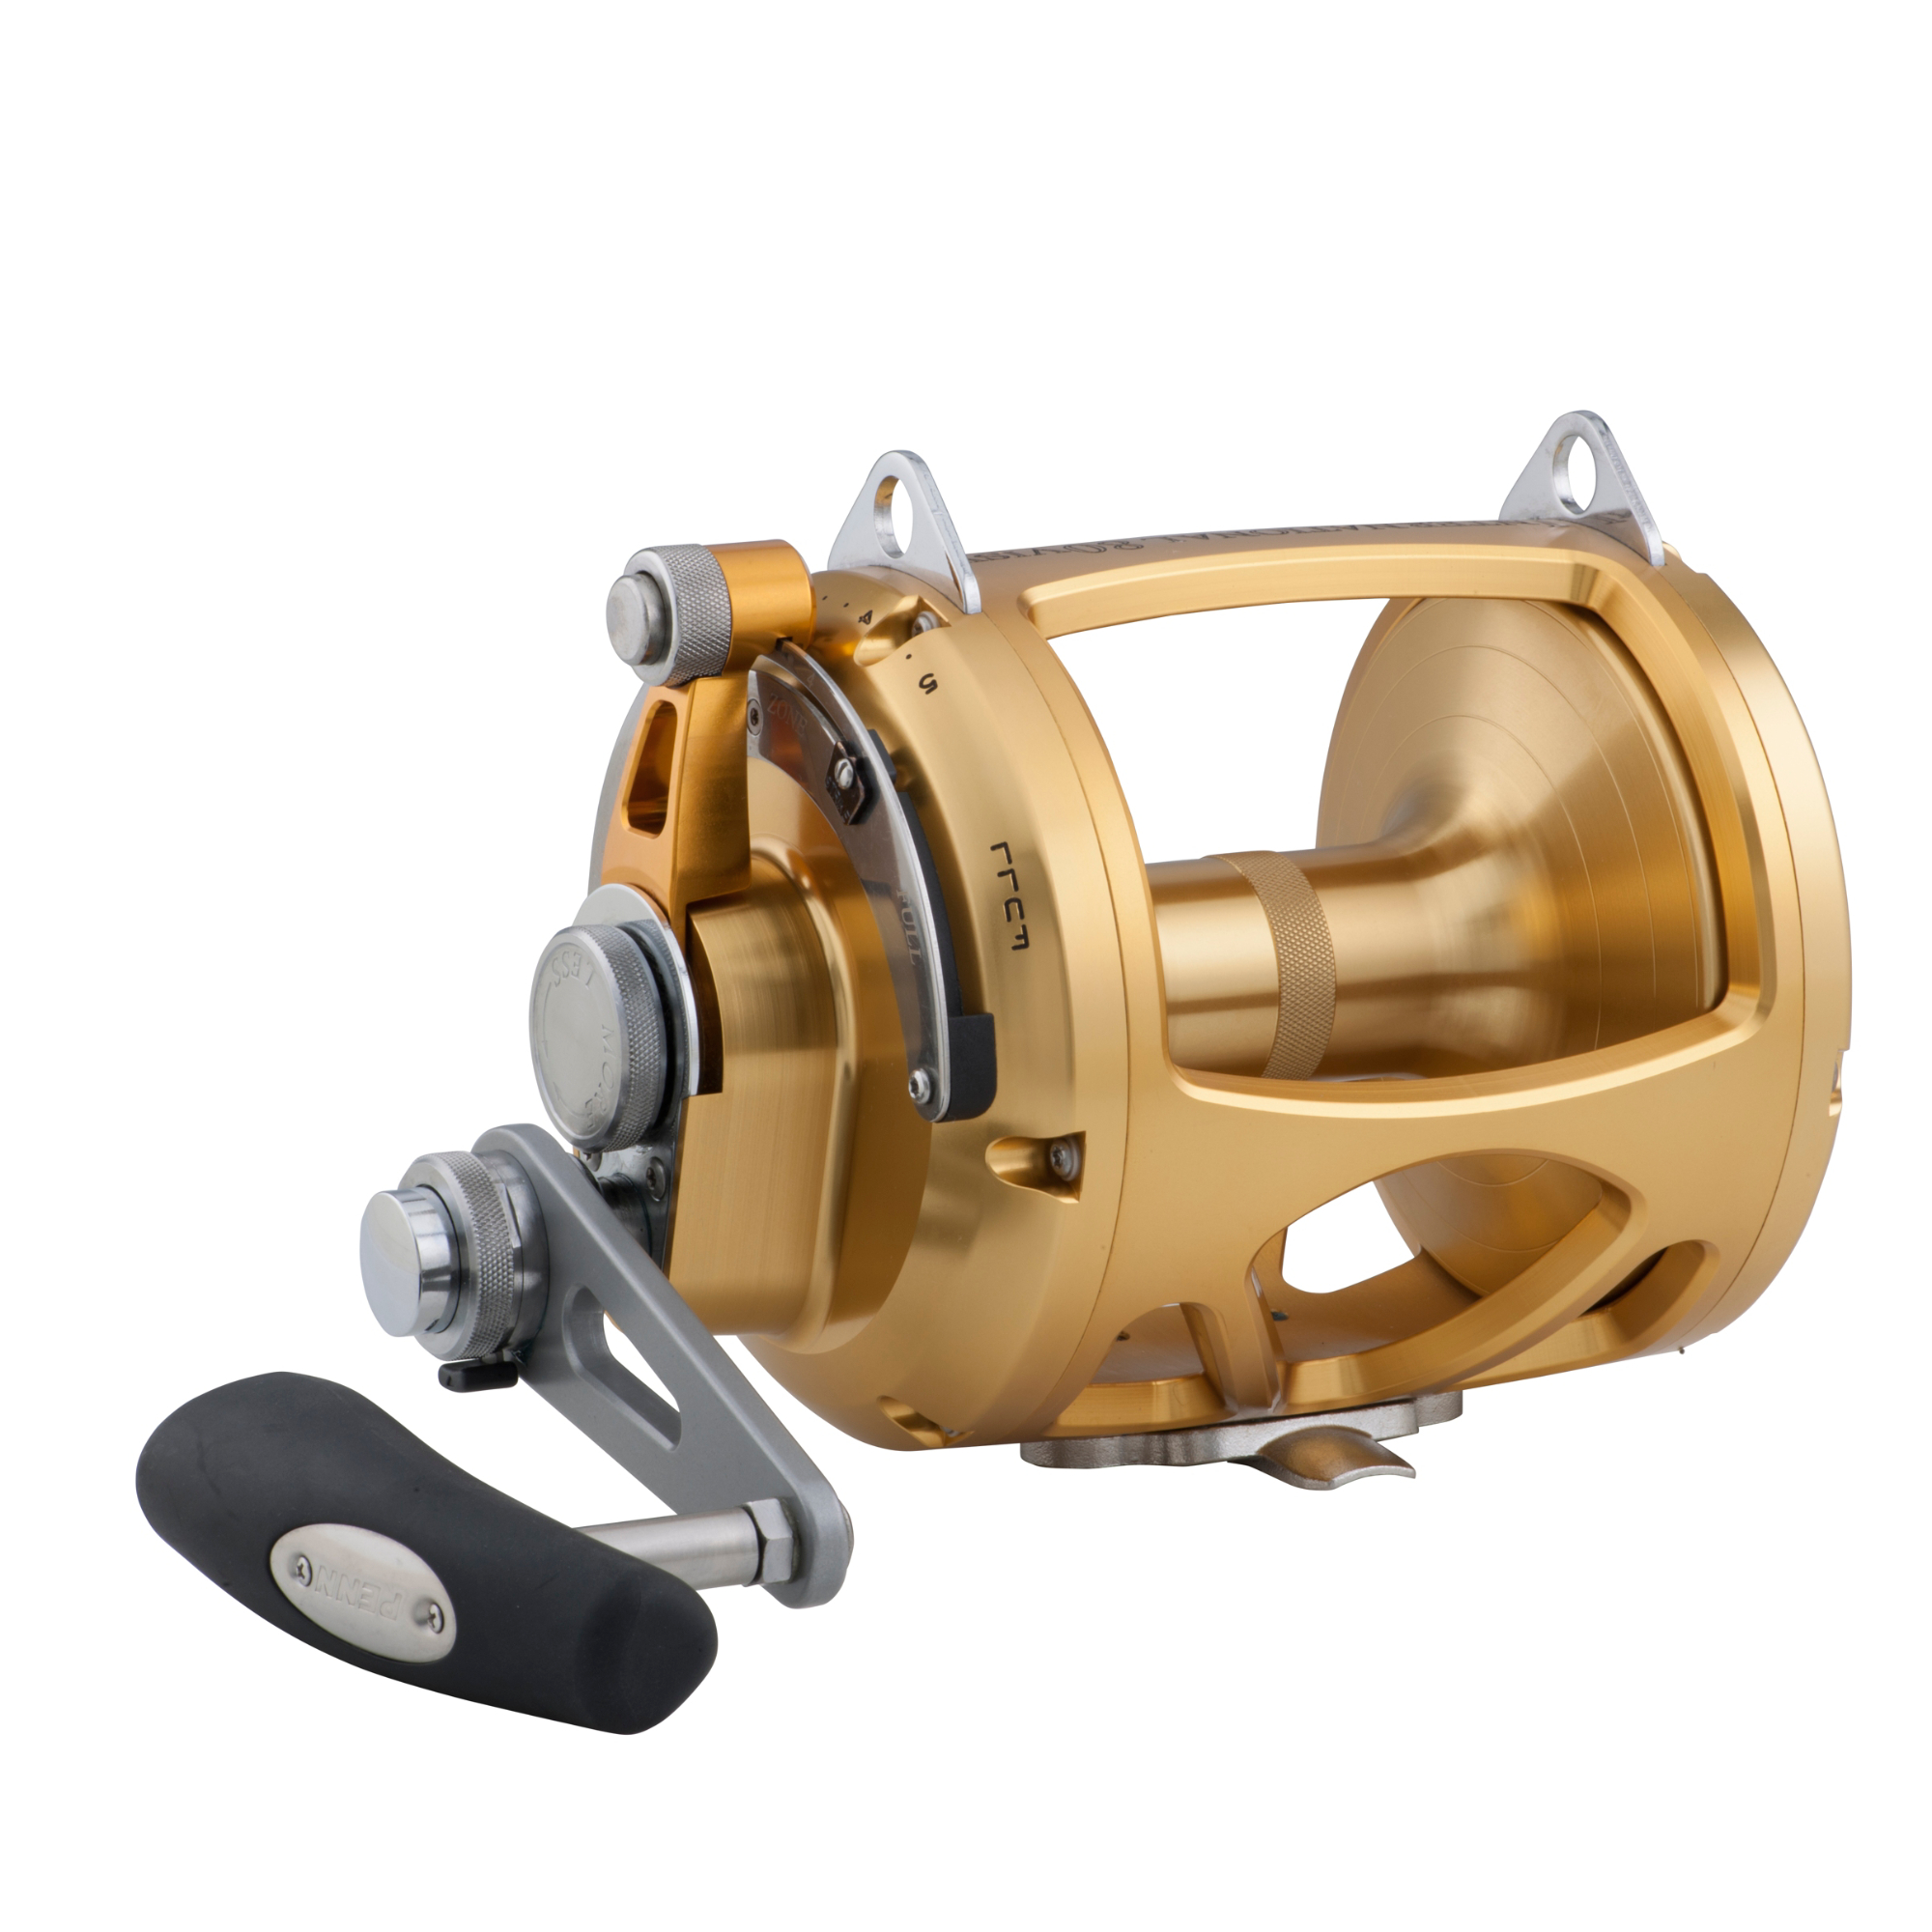 https://www.tunafishtackle.com/wp-content/uploads/2020/04/1447409_80_Gold_IS.jpg